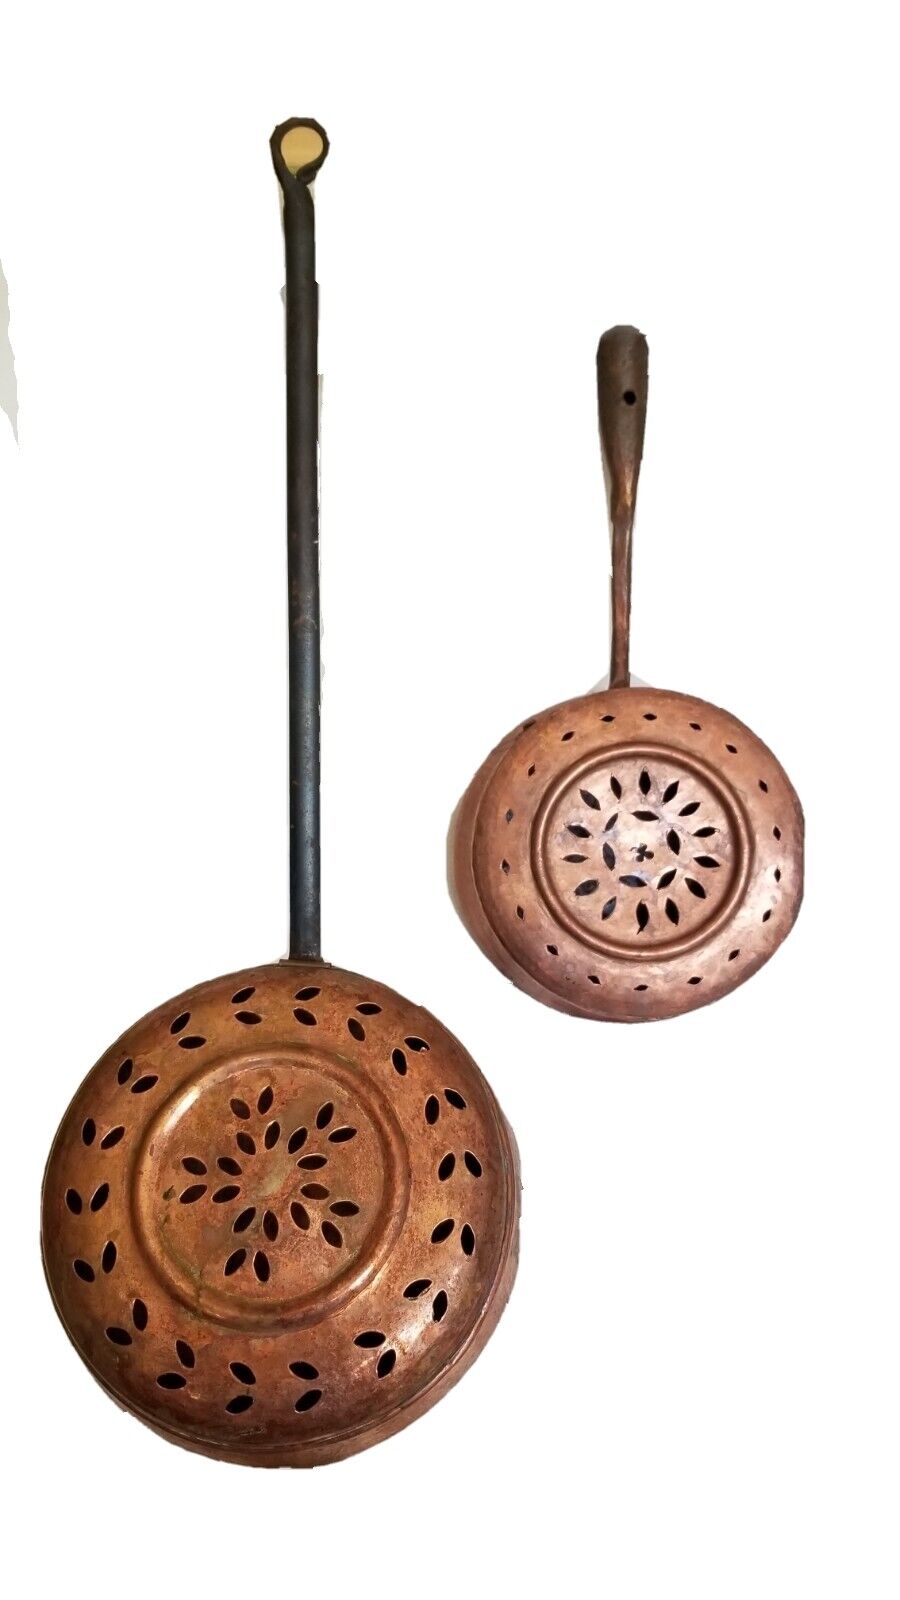 Two Antique Rustic Hammered Copper Hanging Bedwarmer Pots. Ornate & Handmade